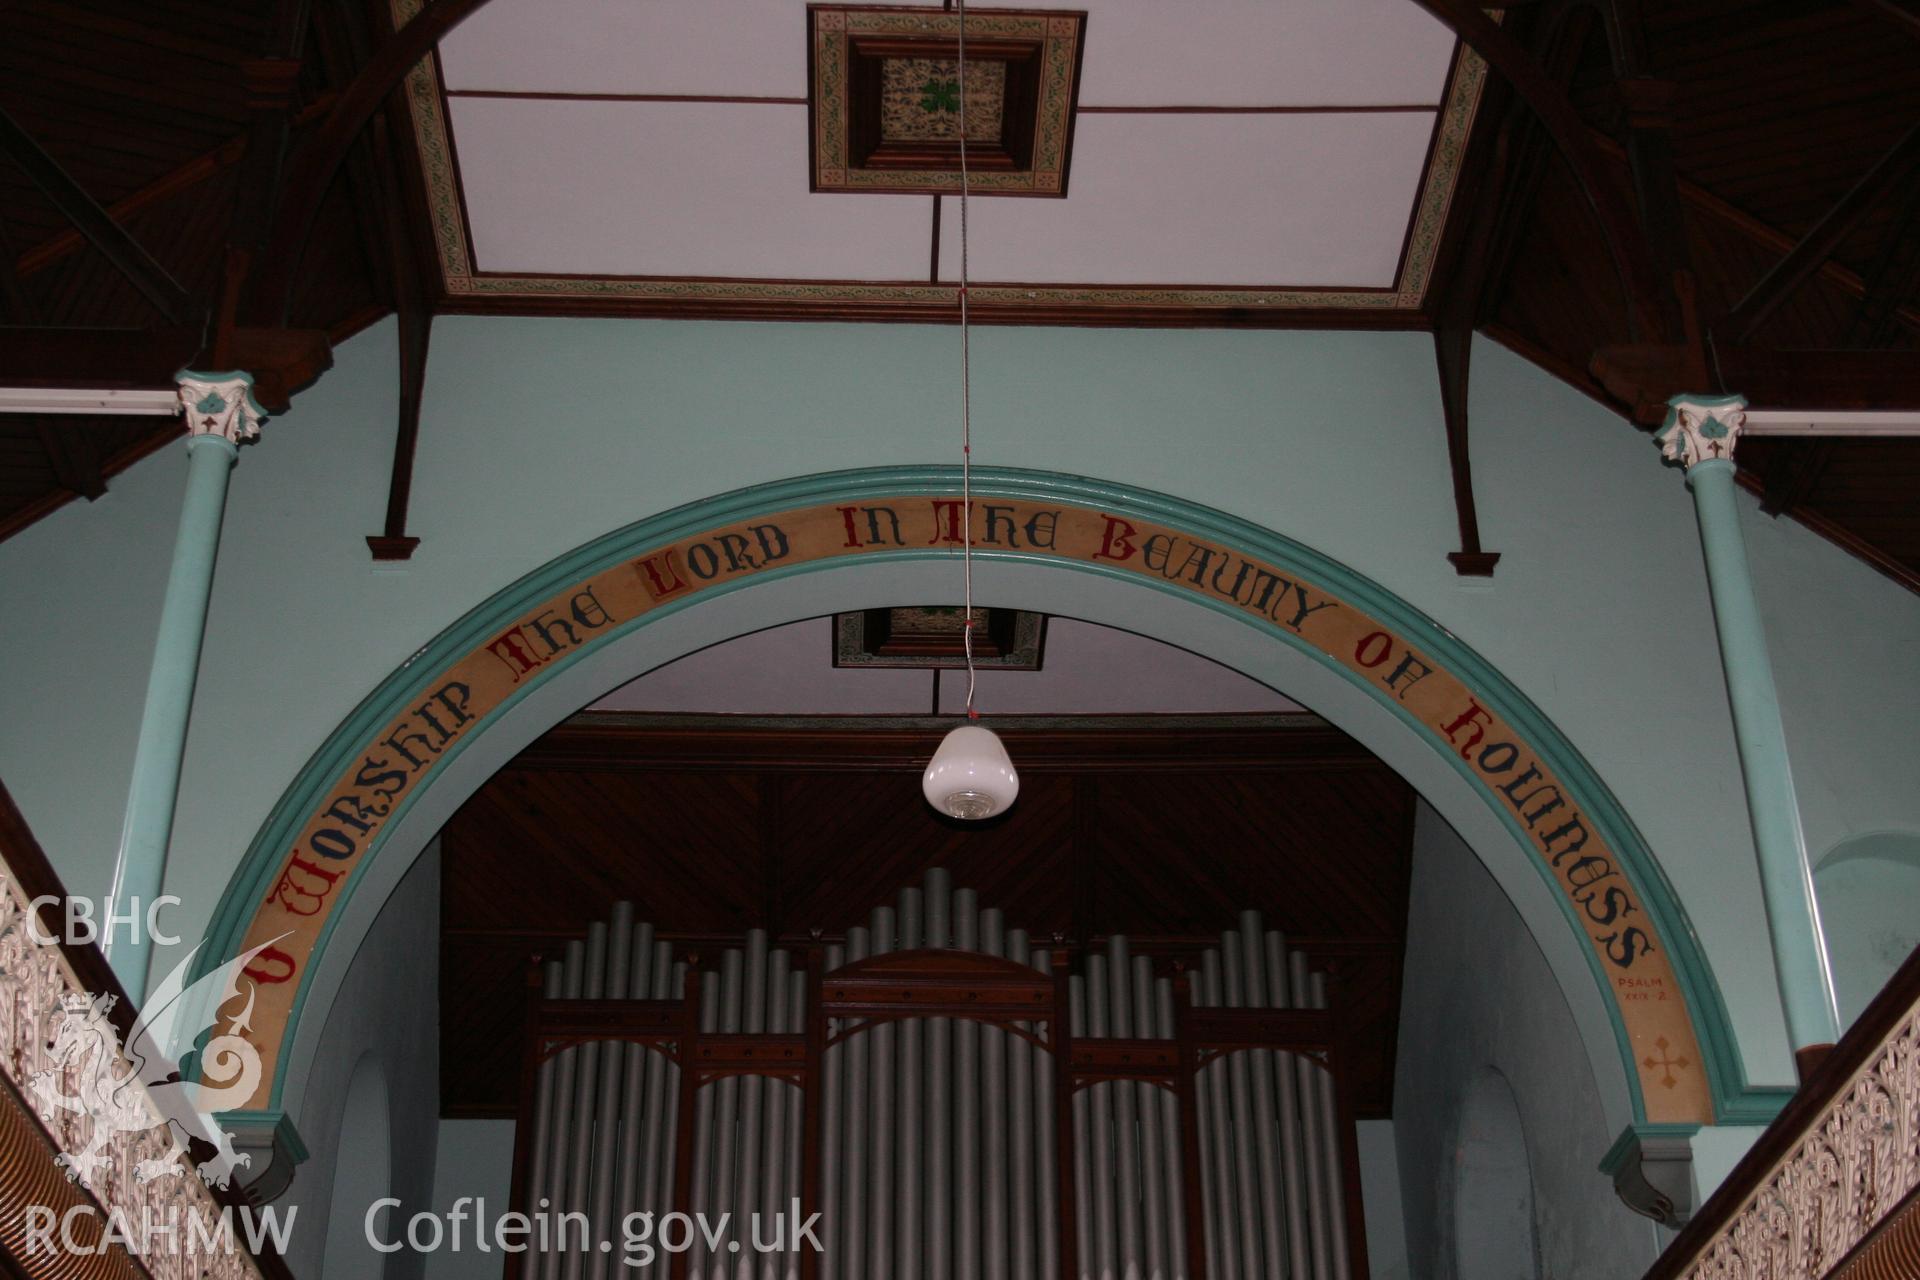 Hanbury Road baptist chapel, Bargoed, digital colour photograph showing painted inscription above the organ, received in the course of Emergency Recording case ref no RCS2/1/2247.